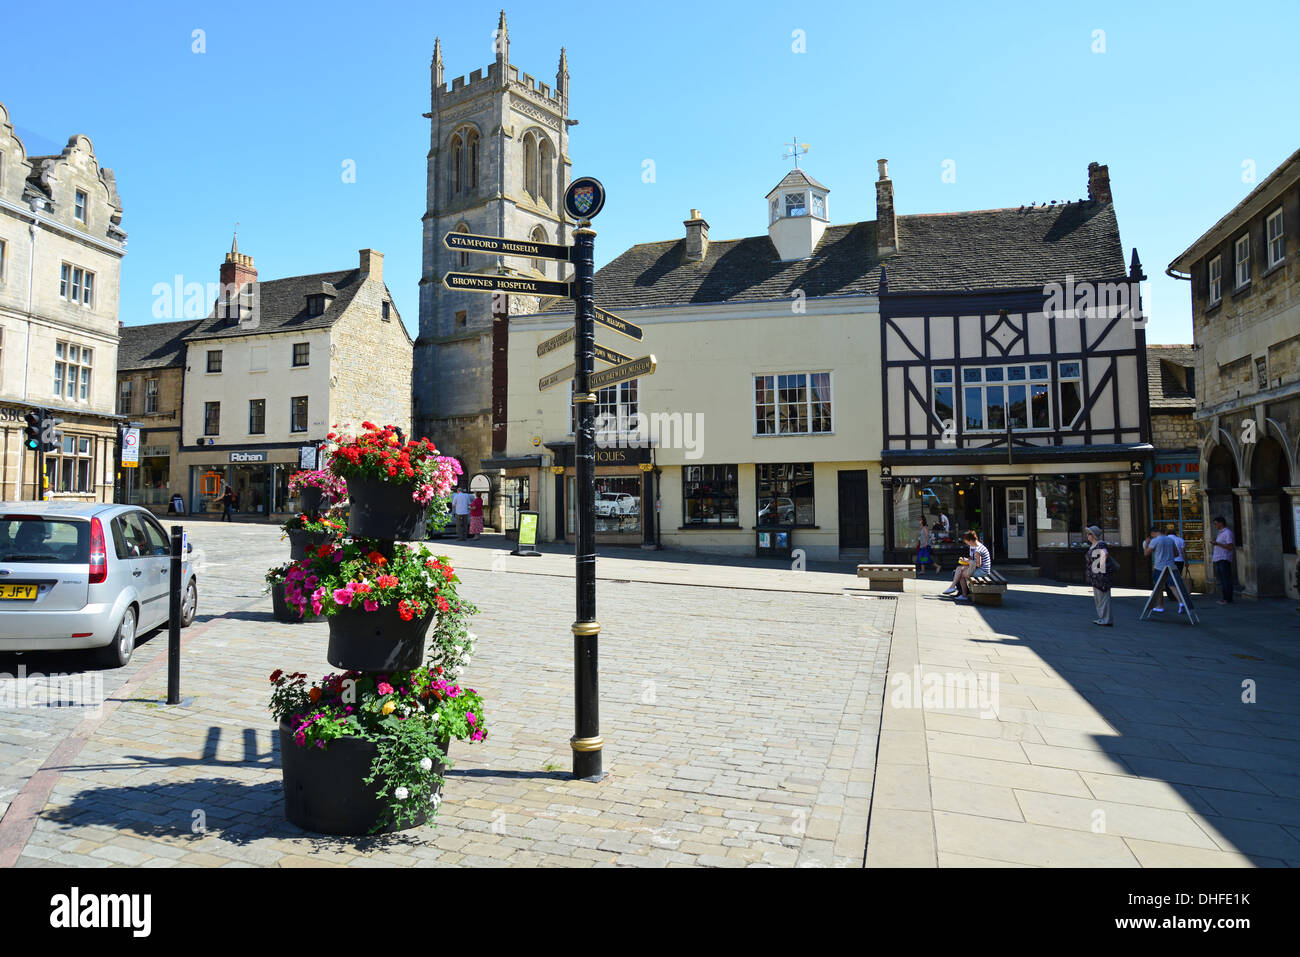 Red Lion Square showing St Mary's Church, Stamford, Lincolnshire, England, United Kingdom Stock Photo